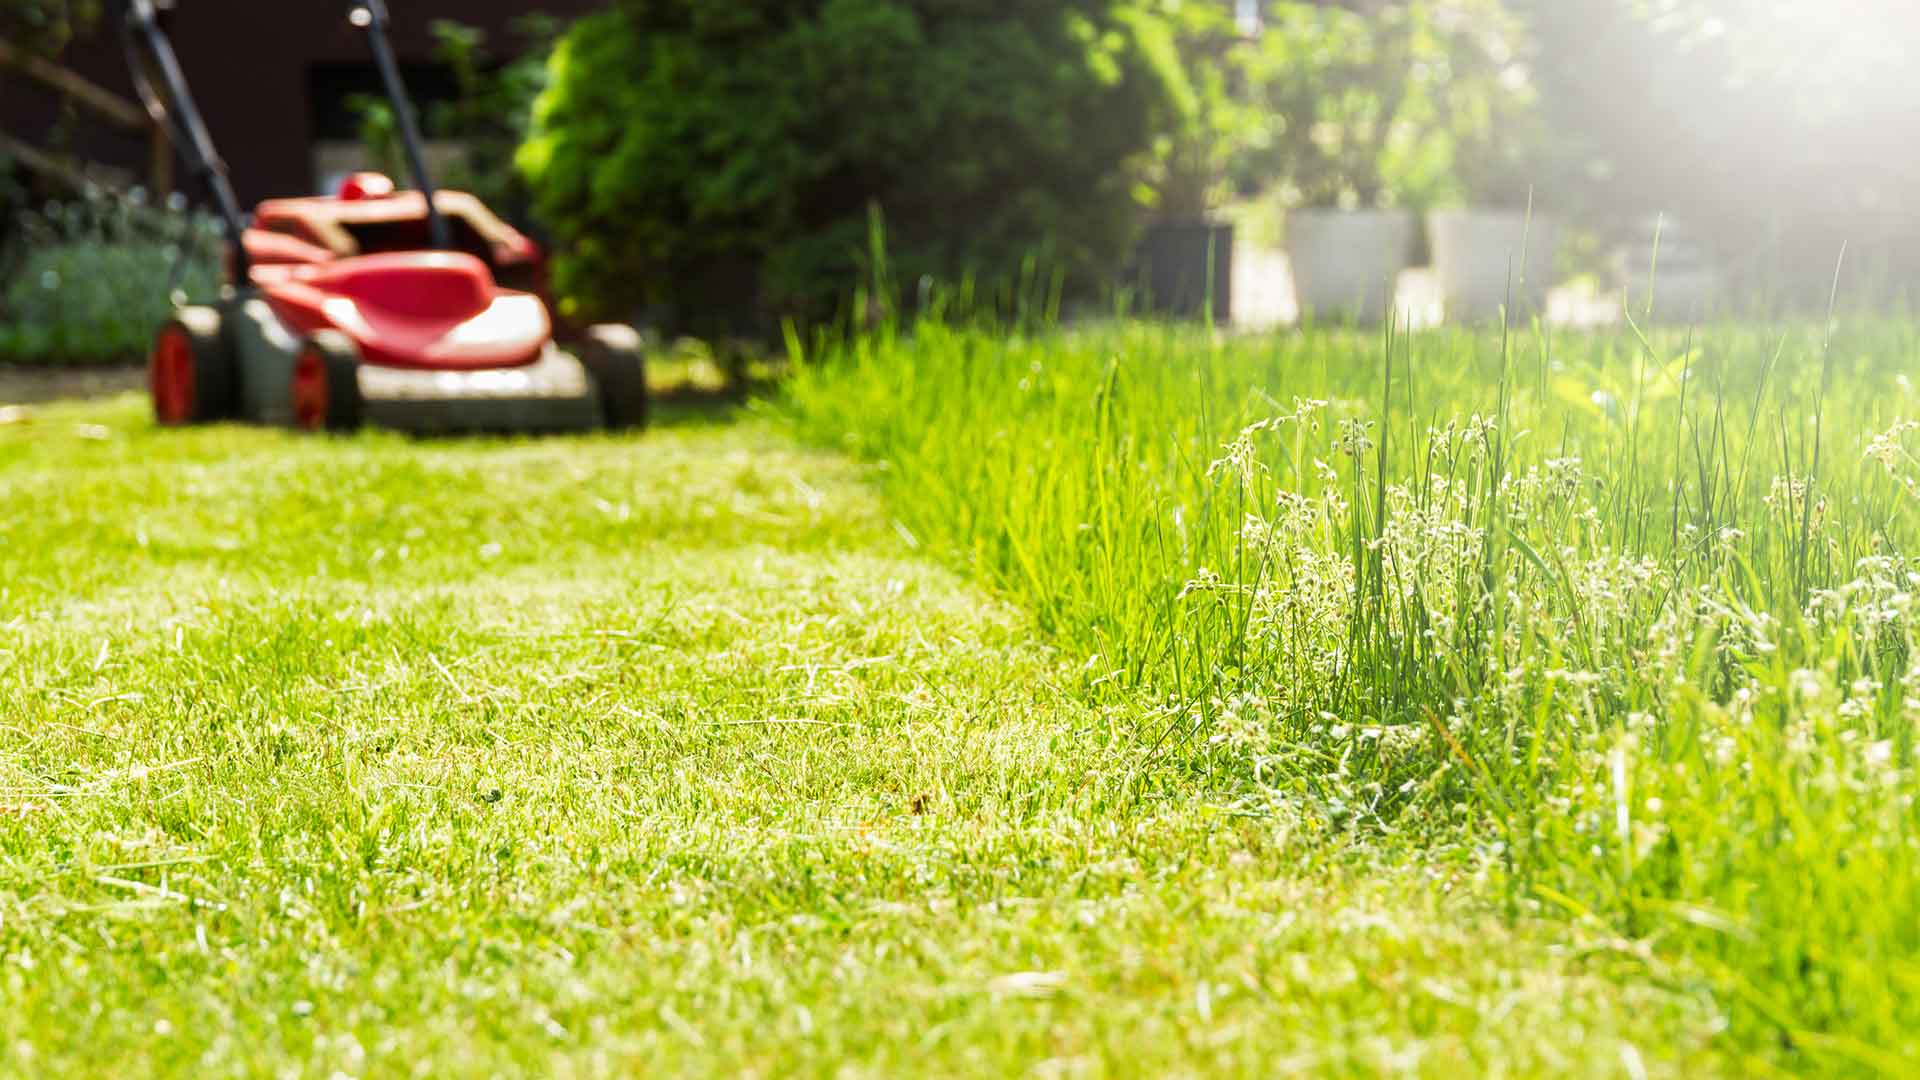 Lawn mowing at a home property in Airdrie, Alberta.